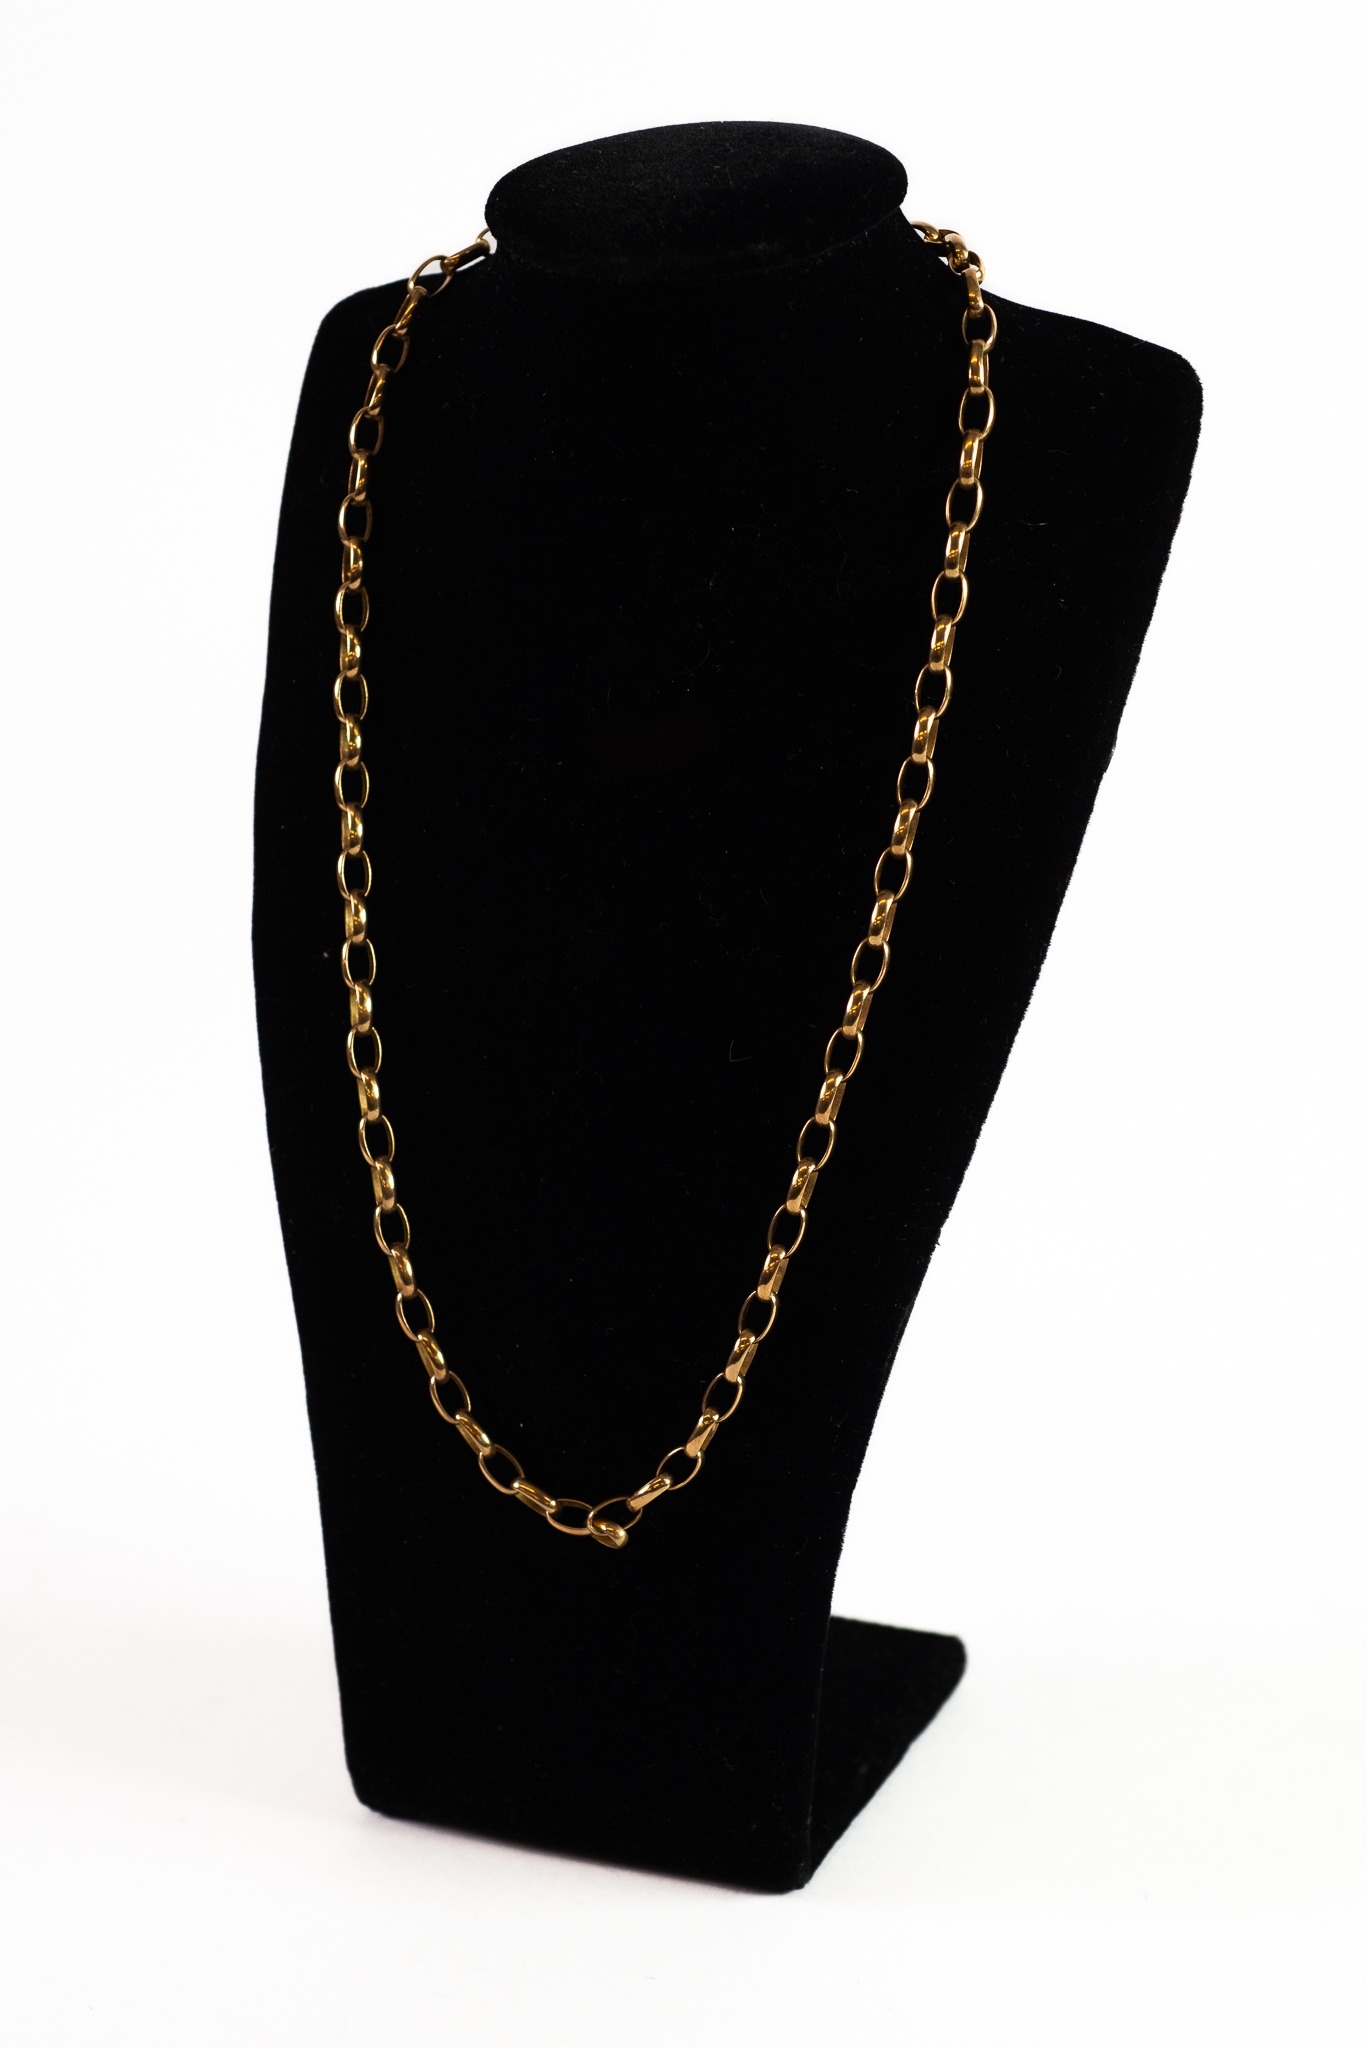 9ct GOLD CHAIN NECKLACE with ring clasp, 17 3/4in (45cm) long, 5.9gms